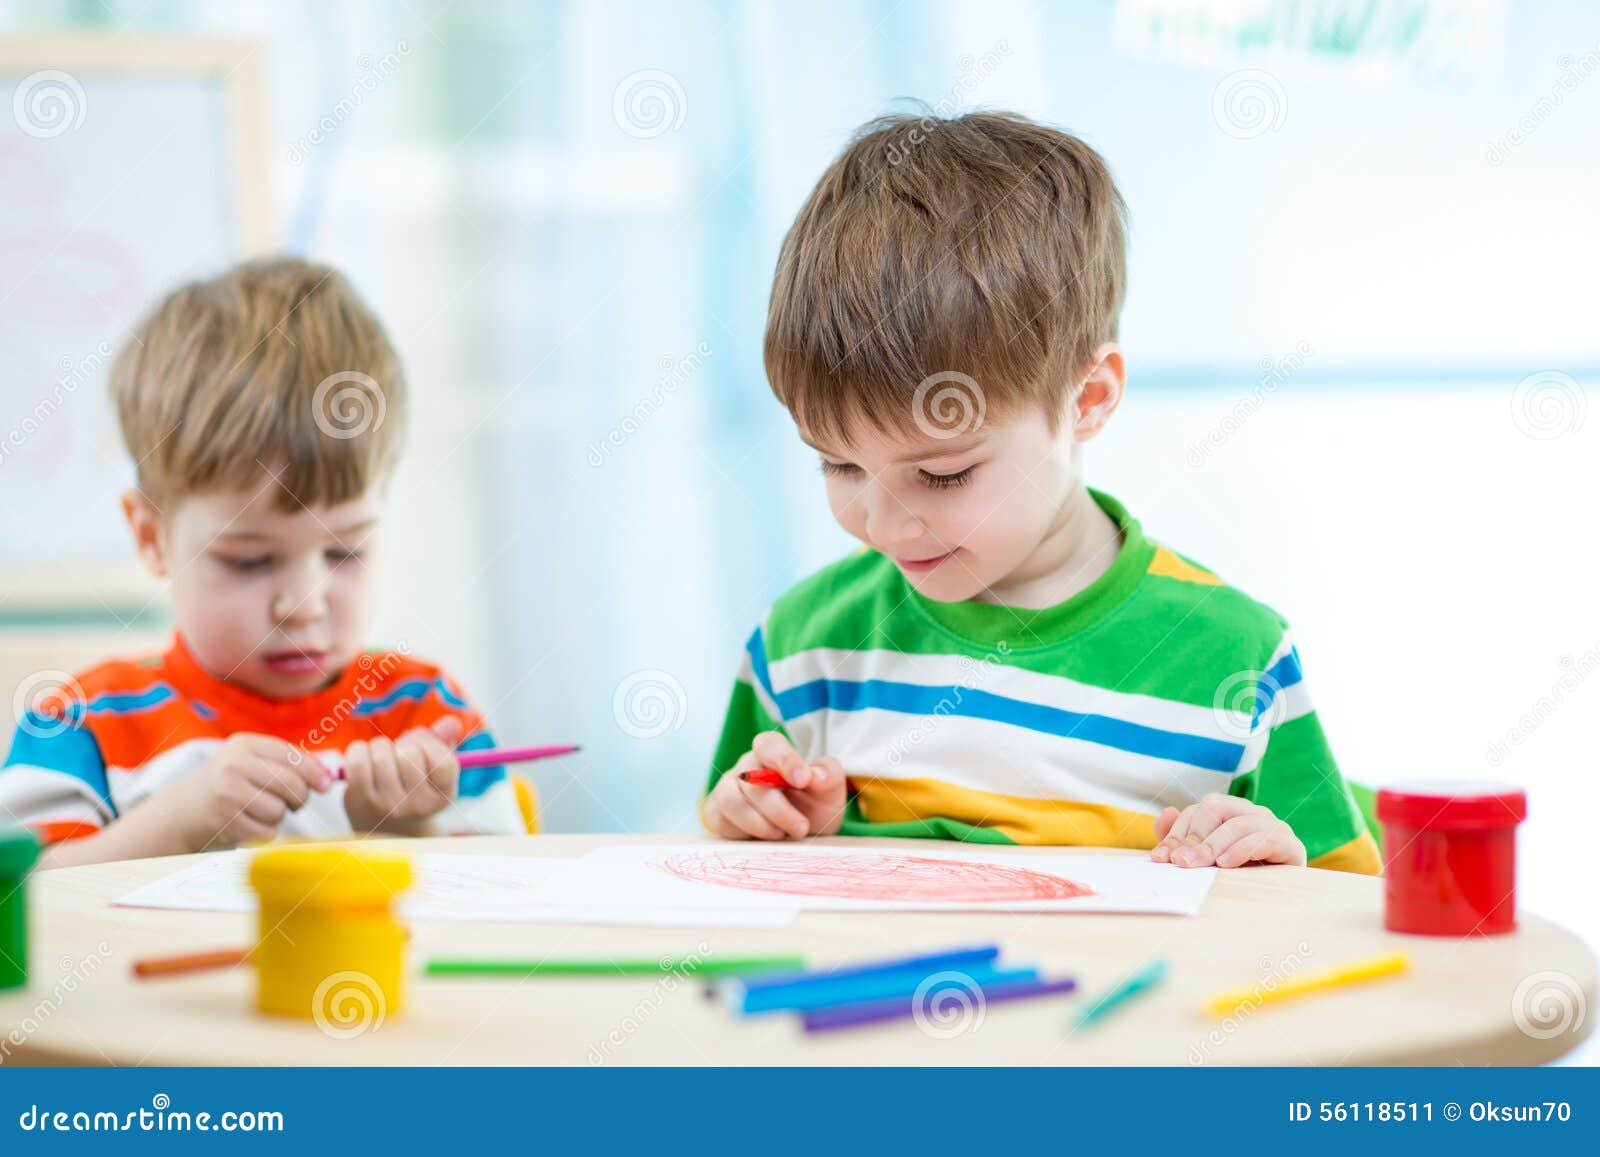 https://thumbs.dreamstime.com/z/children-draw-paint-home-day-care-center-smiling-56118511.jpg